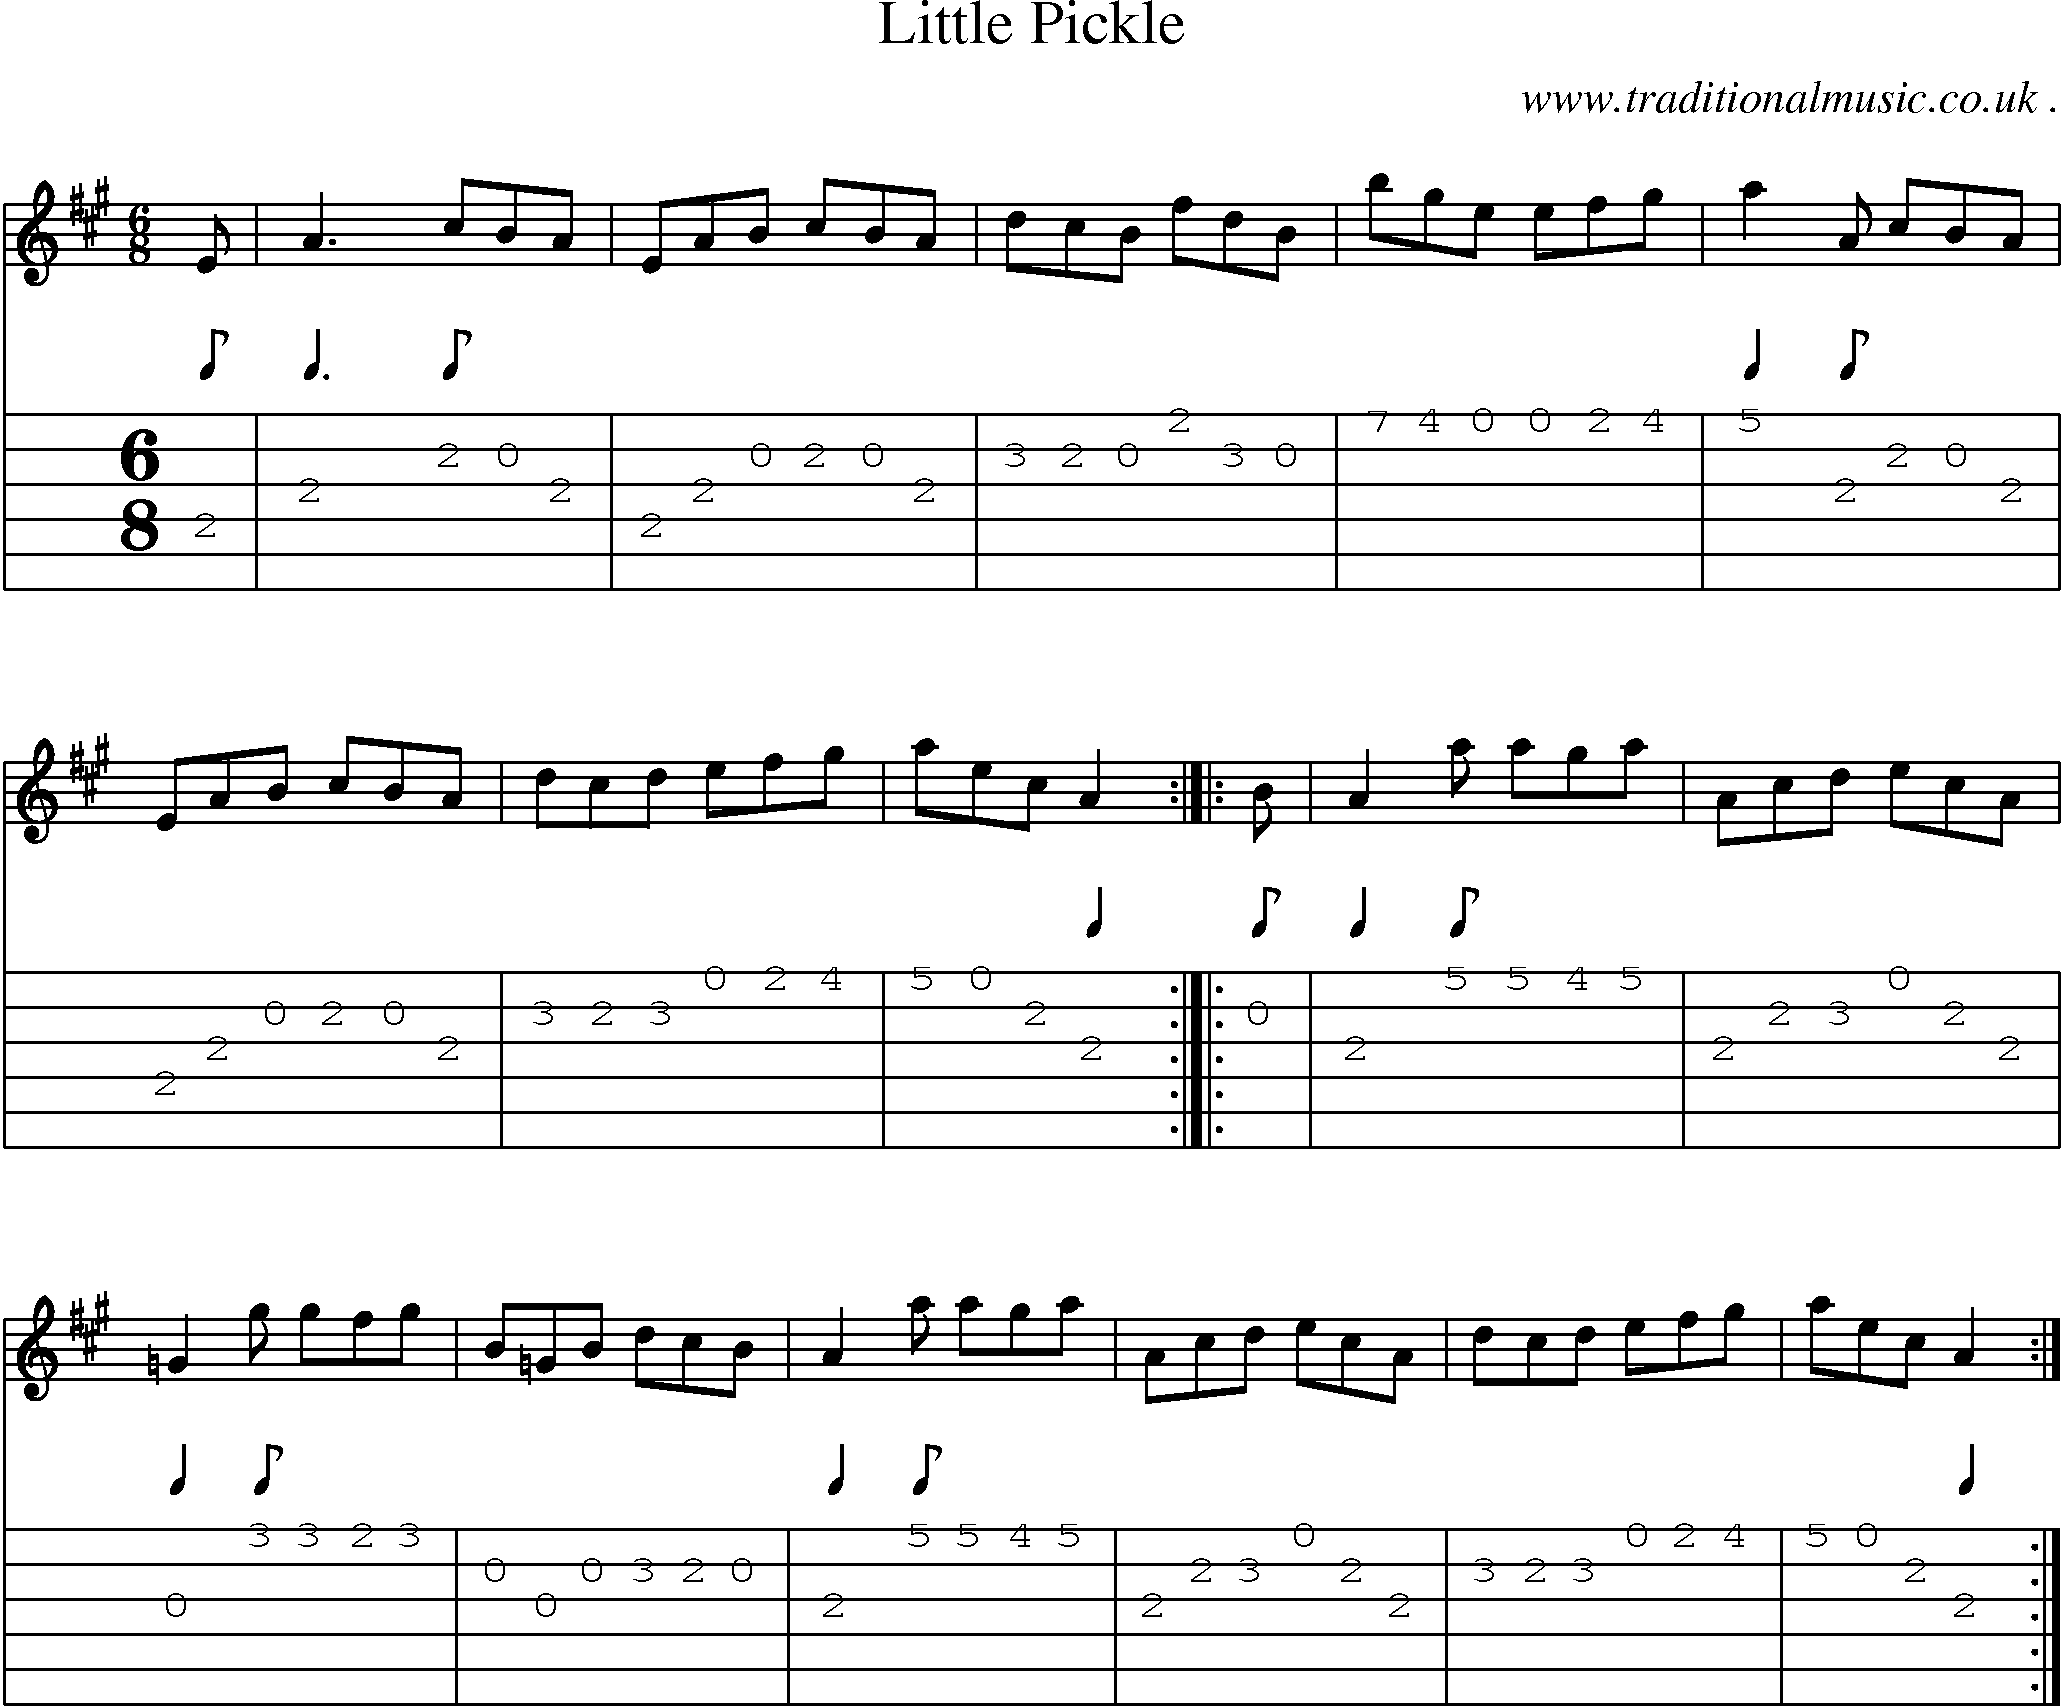 Sheet-music  score, Chords and Guitar Tabs for Little Pickle